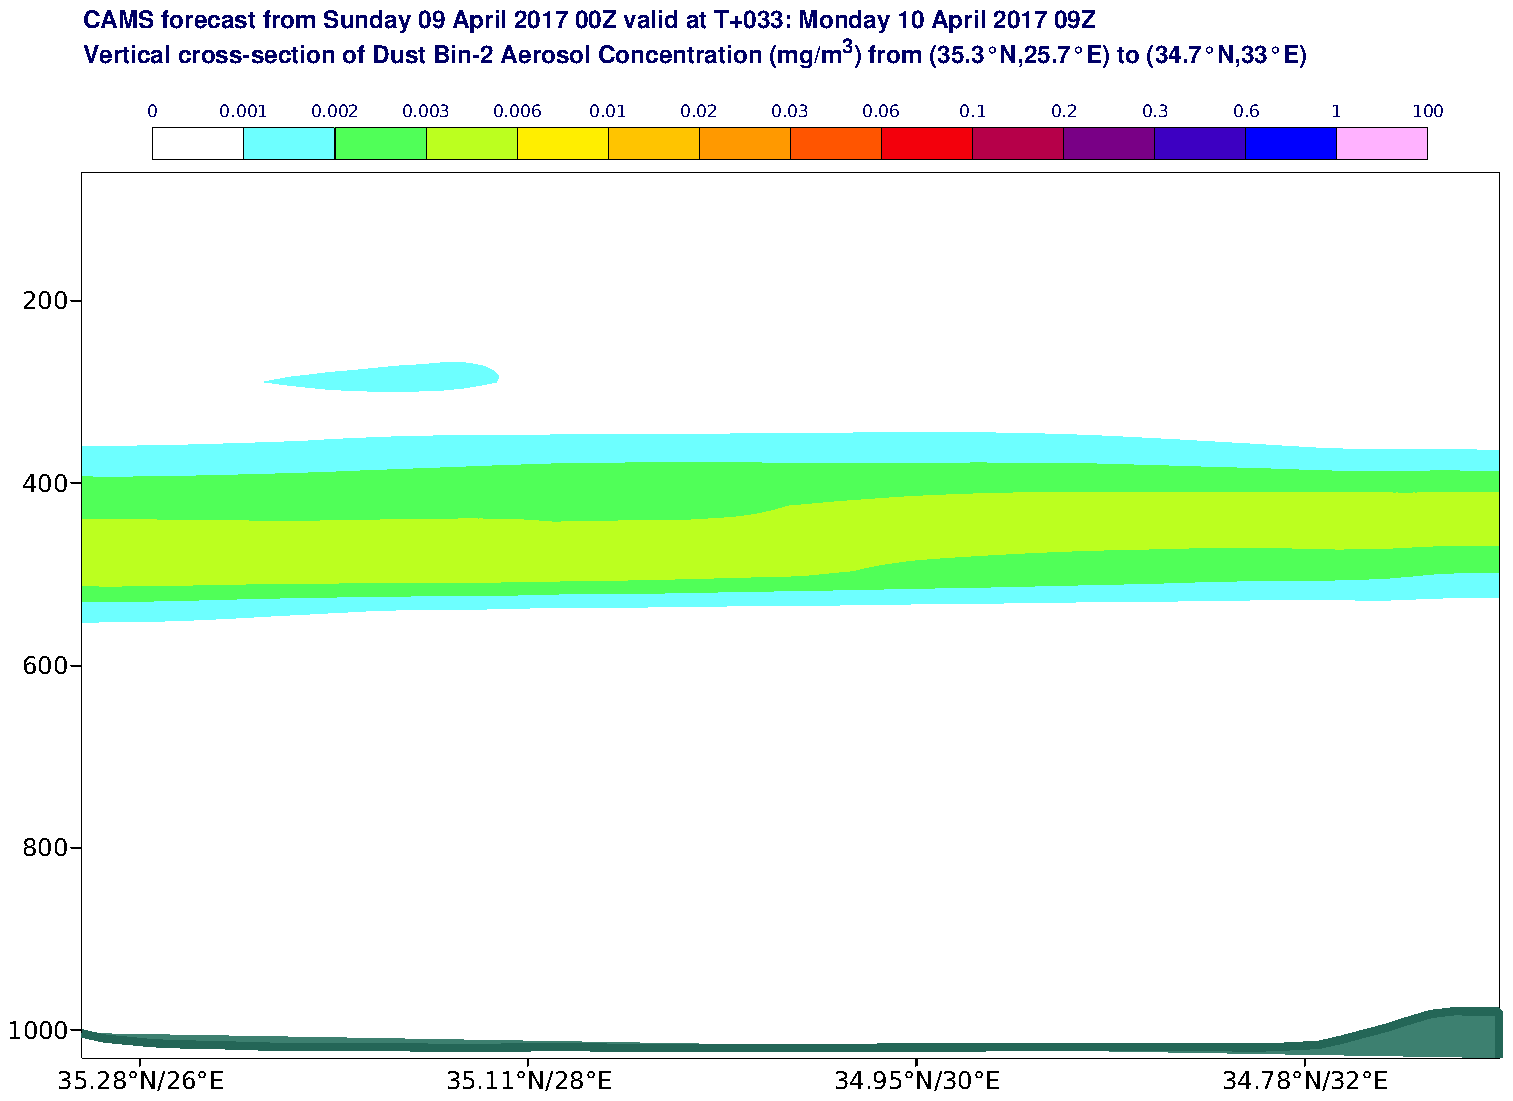 Vertical cross-section of Dust Bin-2 Aerosol Concentration (mg/m3) valid at T33 - 2017-04-10 09:00